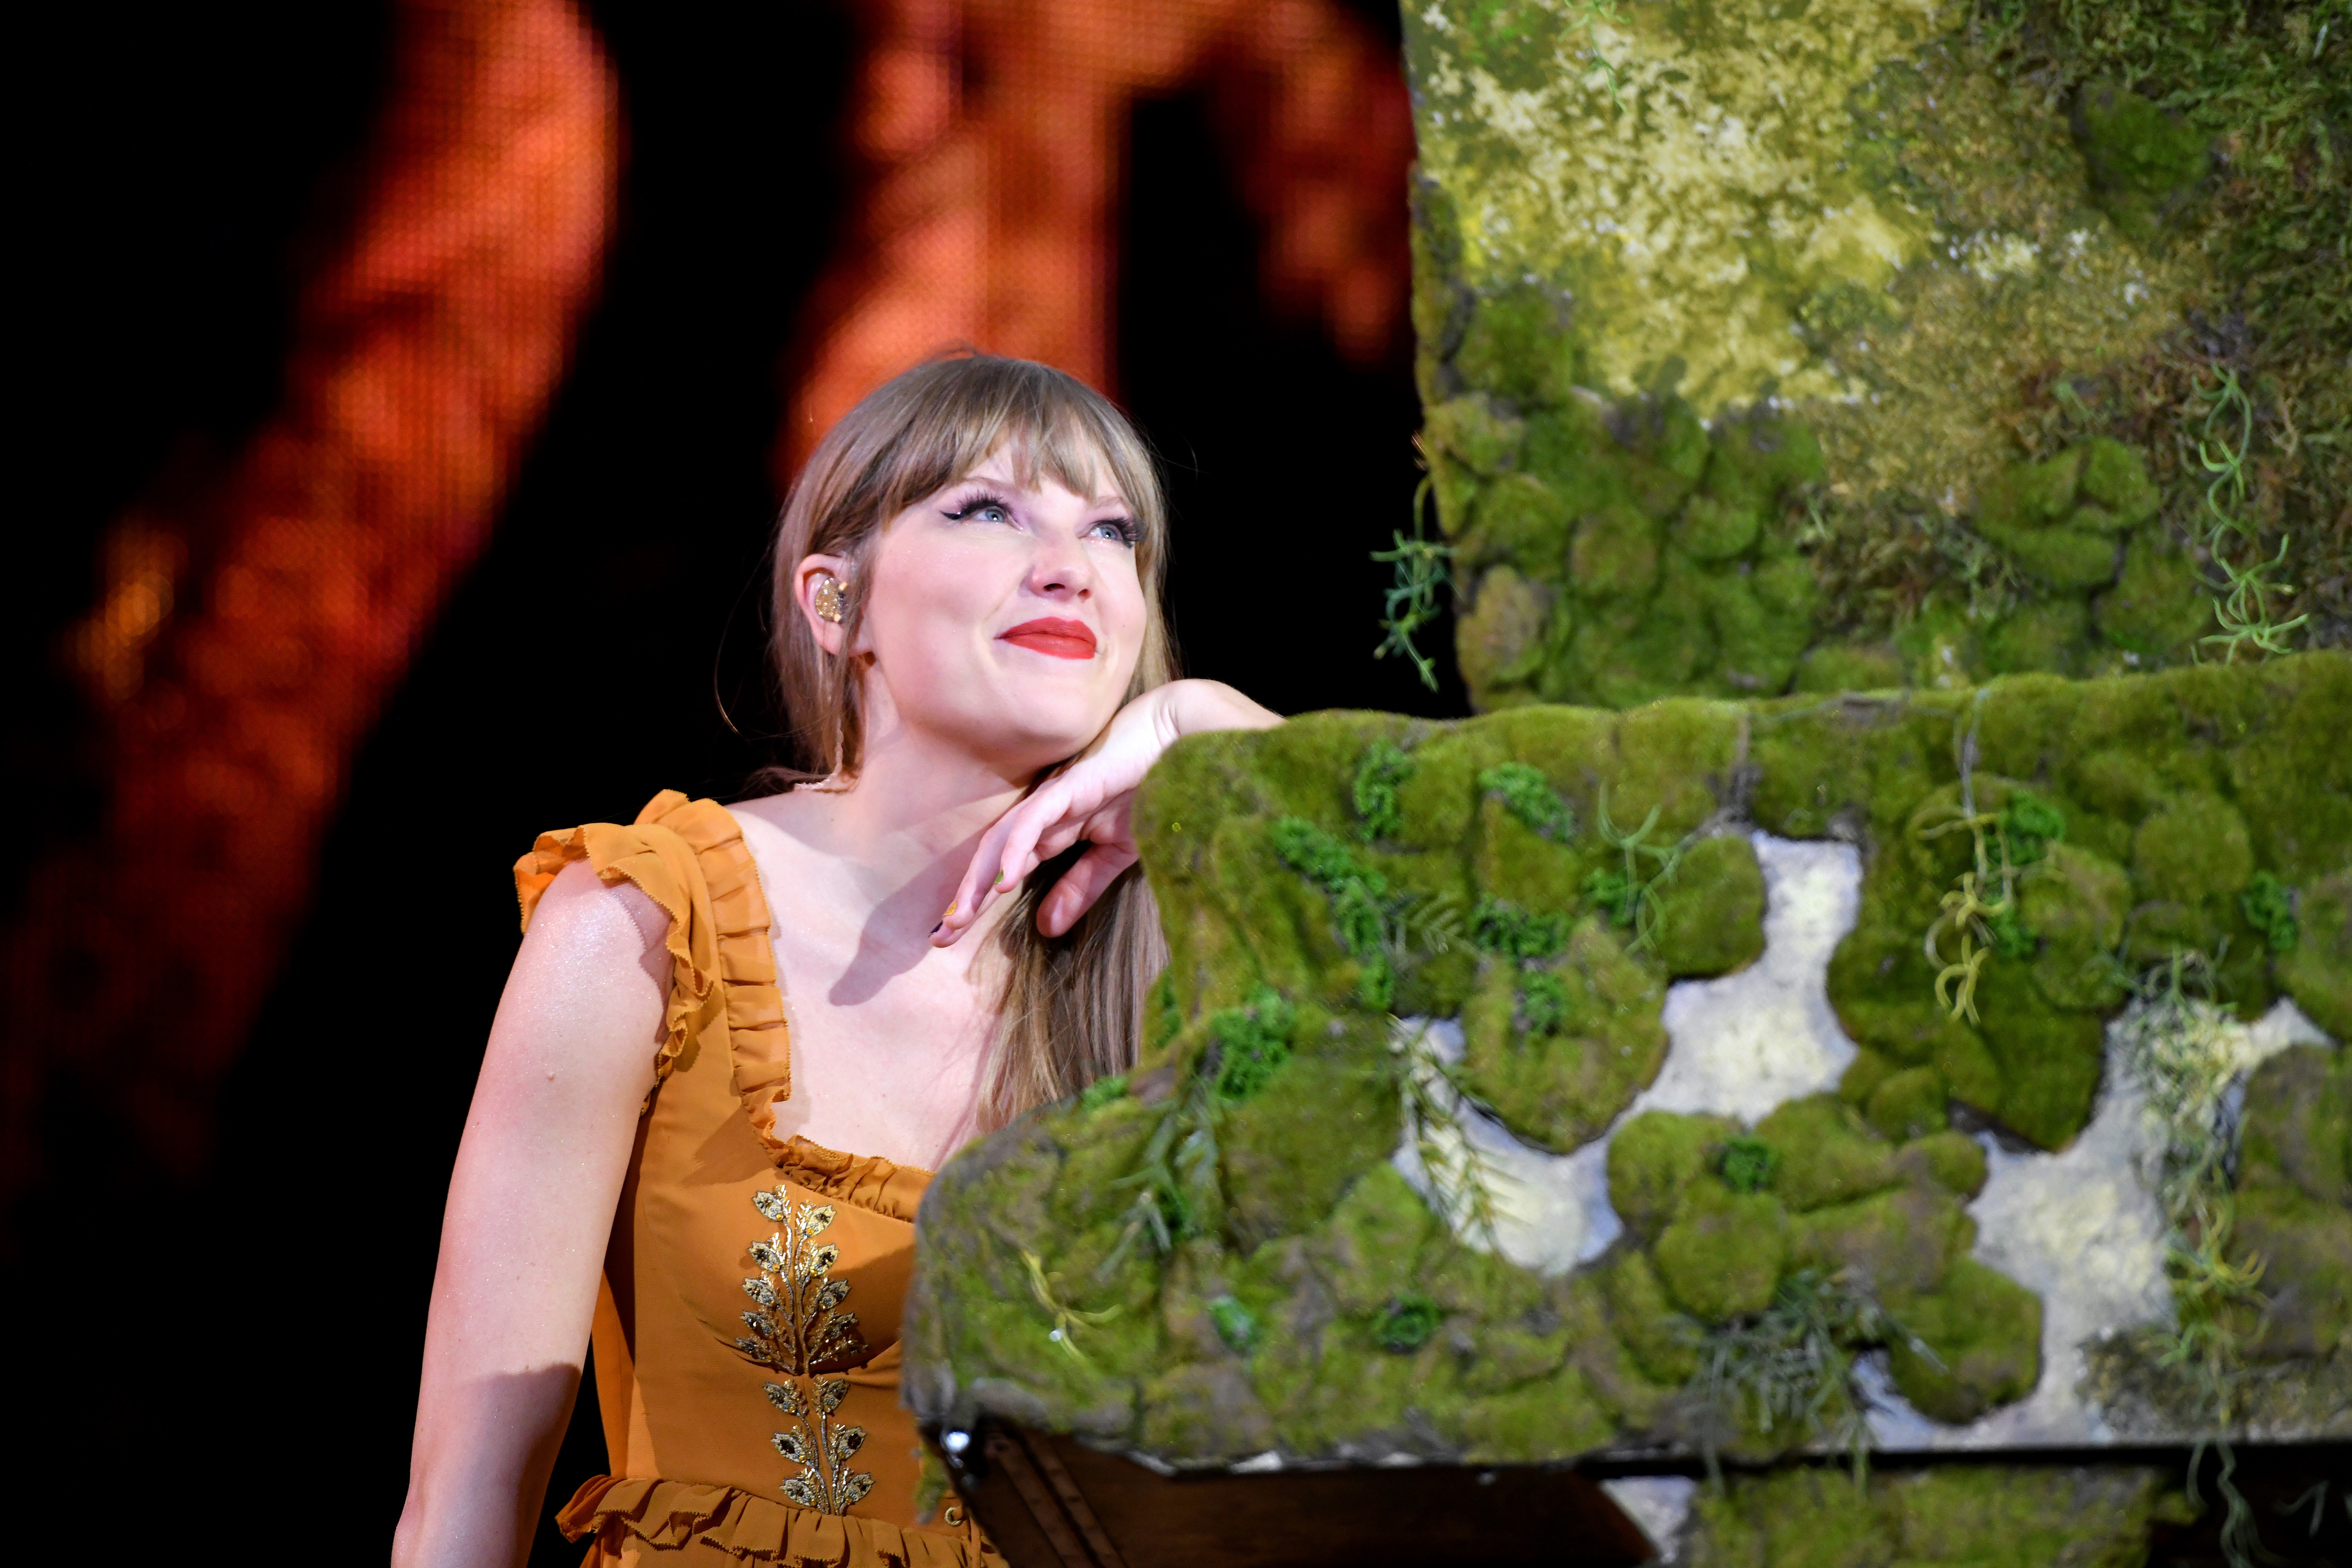 Close-up of Taylor smiling and leaning on a mossy surface as she looks up